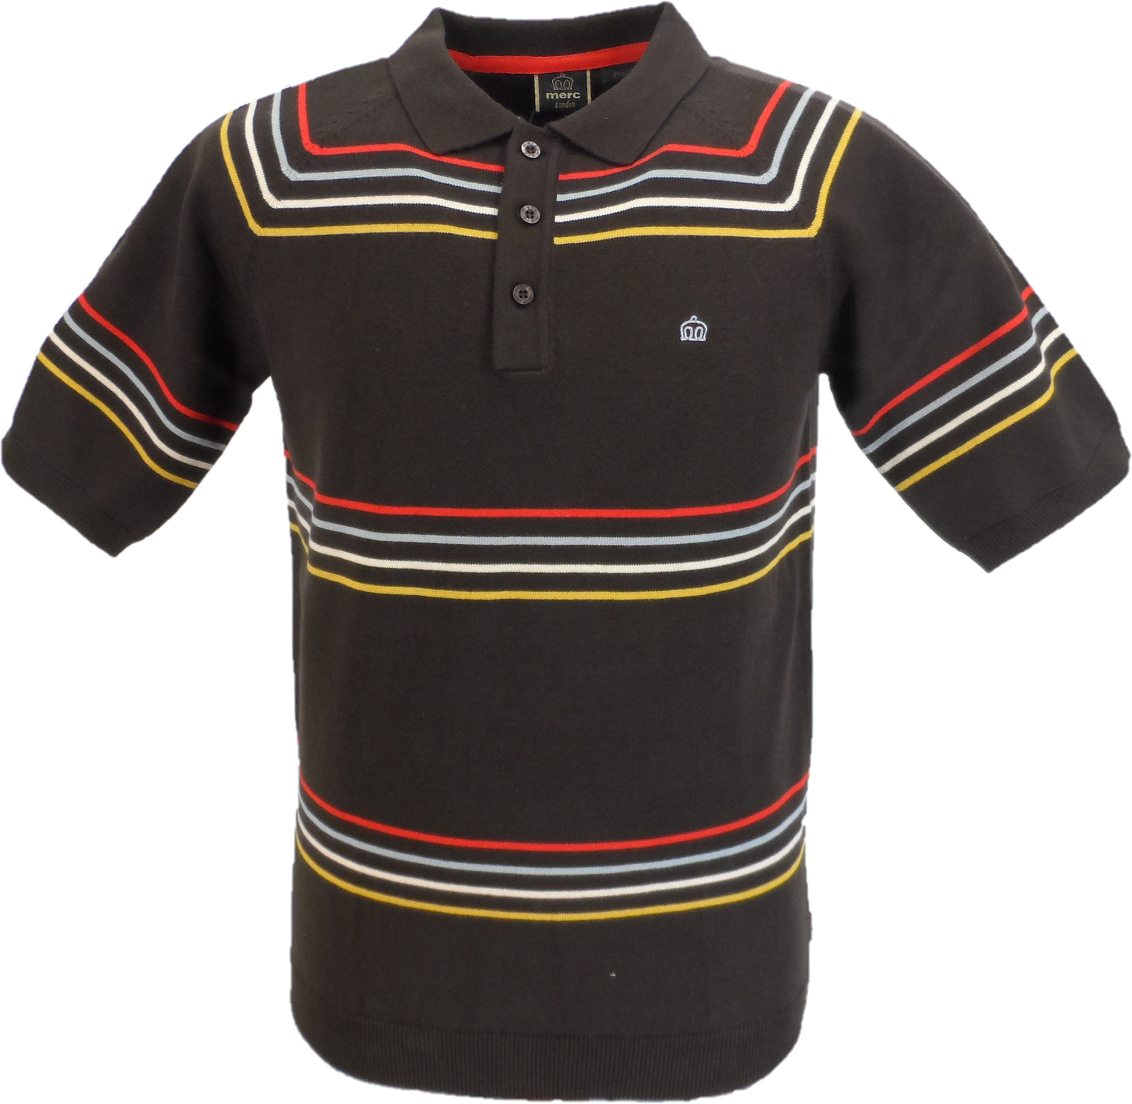 Merc Mens Madison Brown Knitted Vintage Mod Polo Shirts